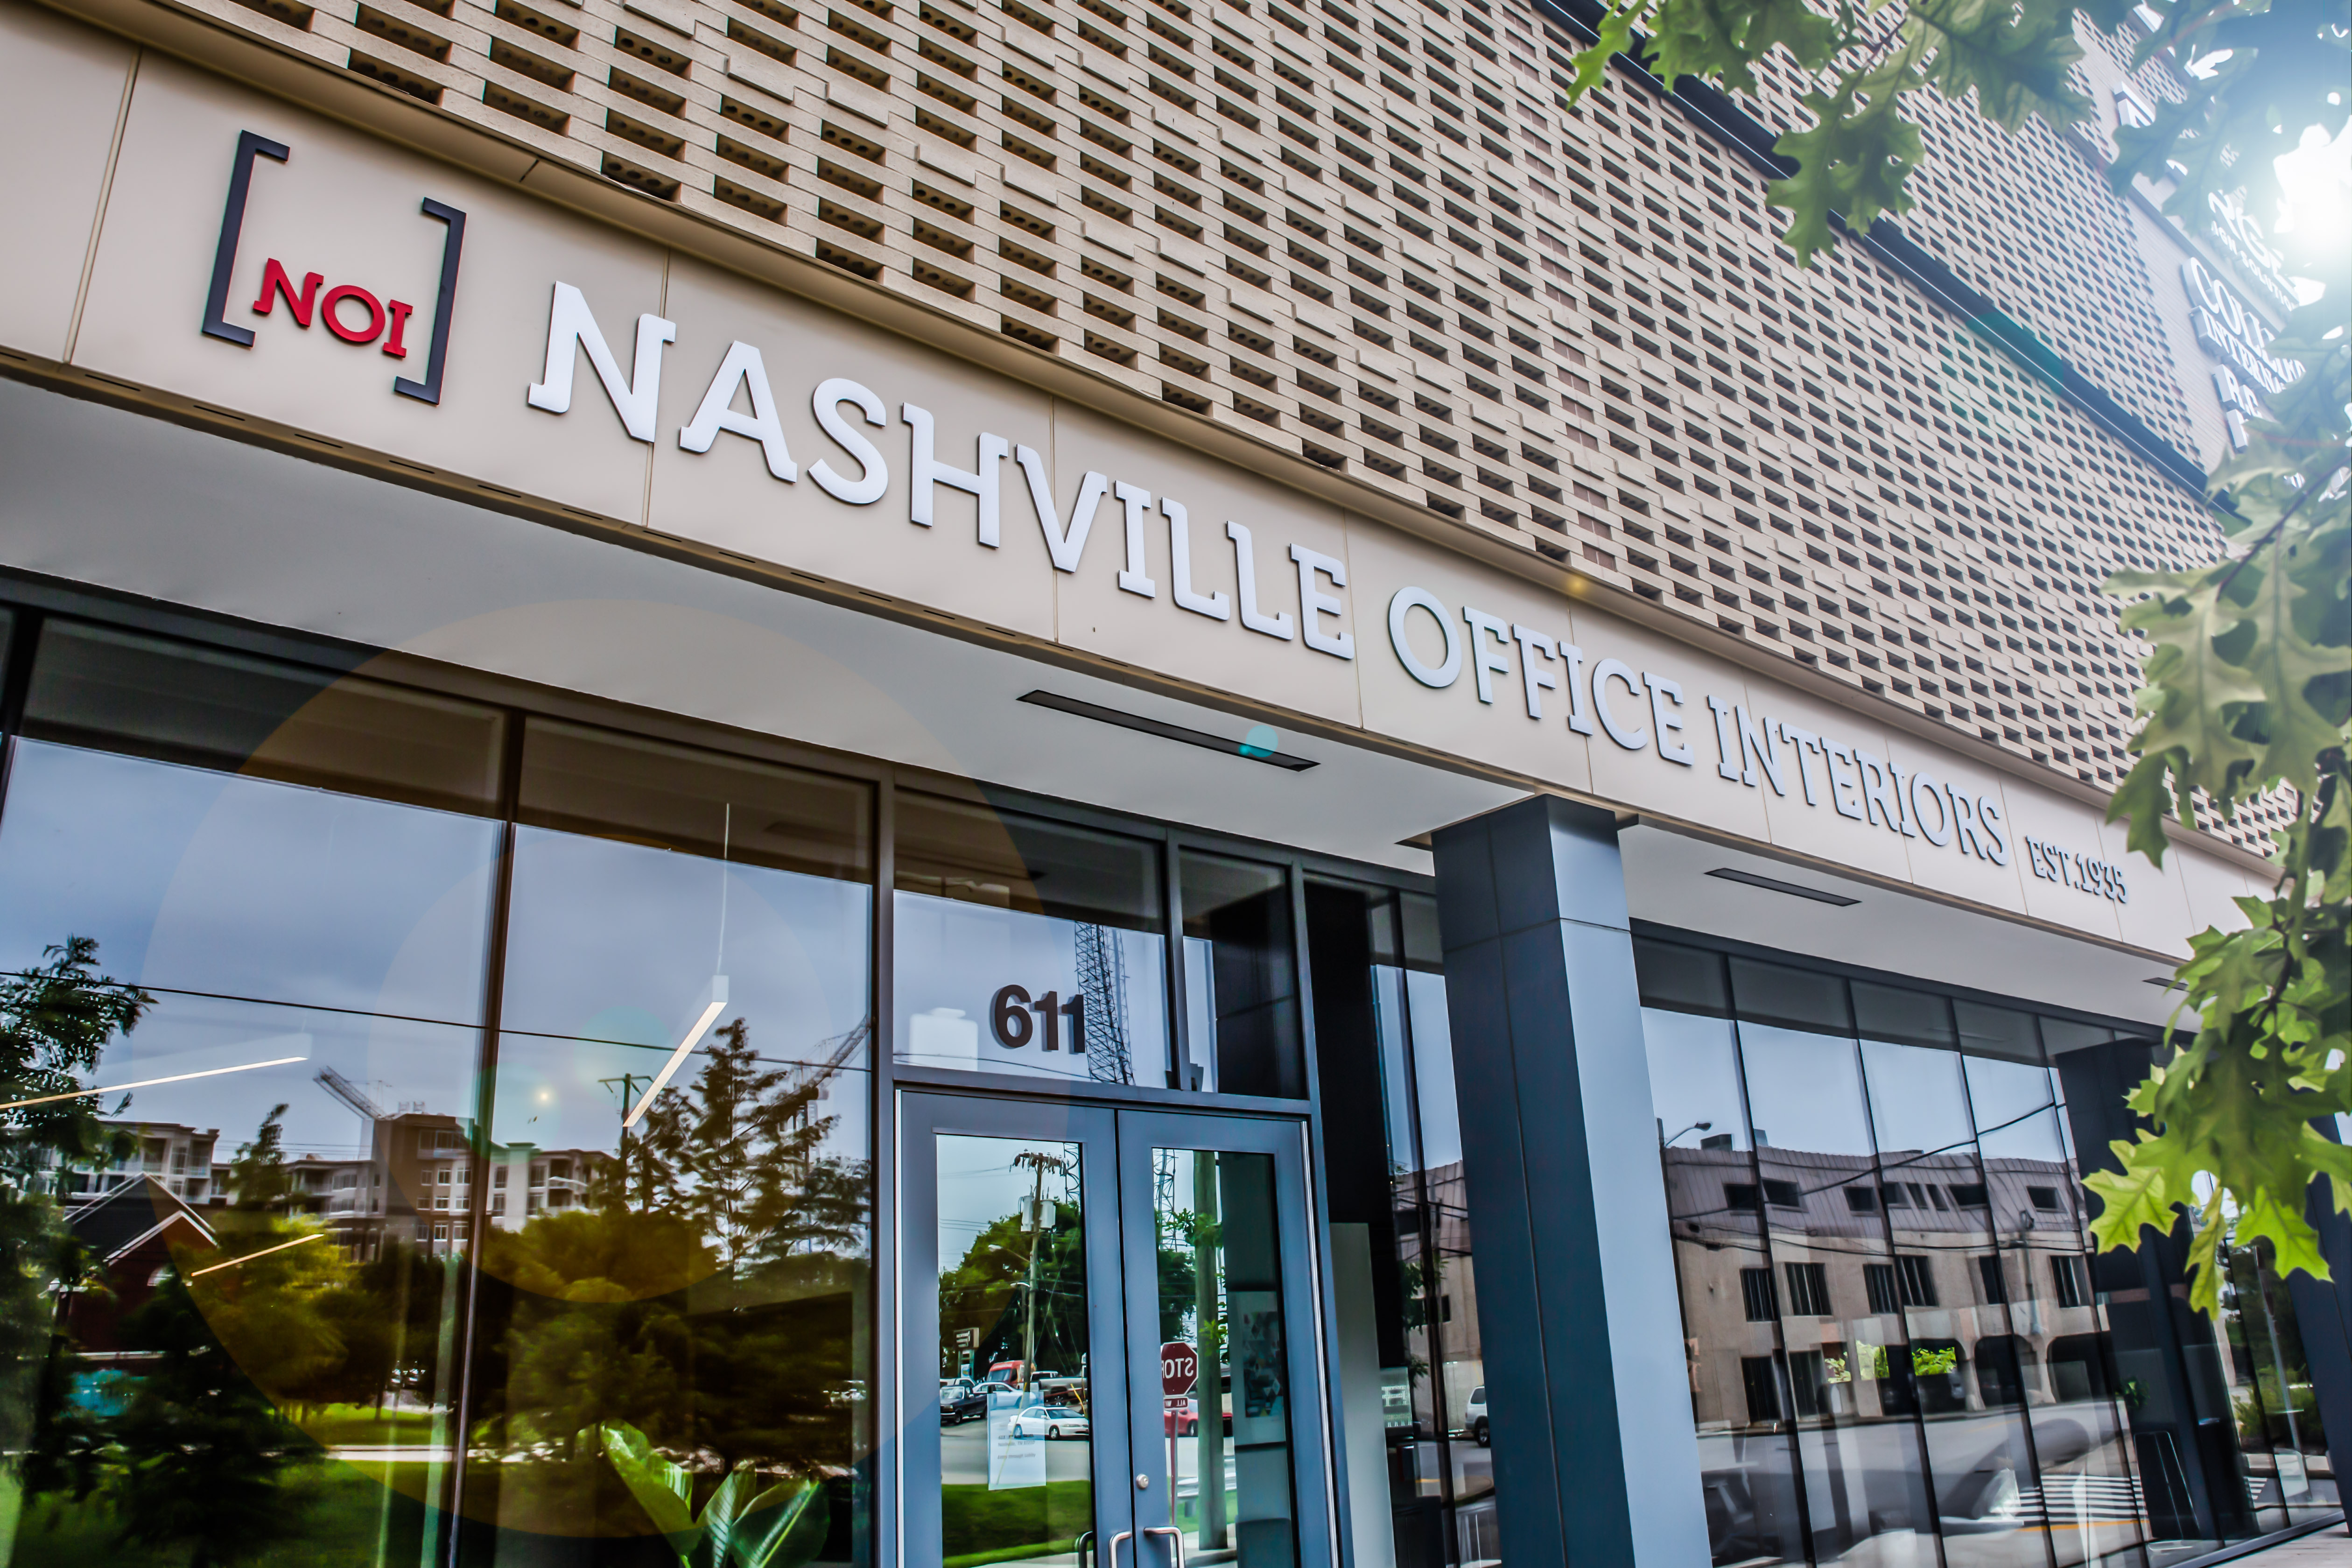 Nashville Office Interiors Hosts Grand Opening To Celebrate